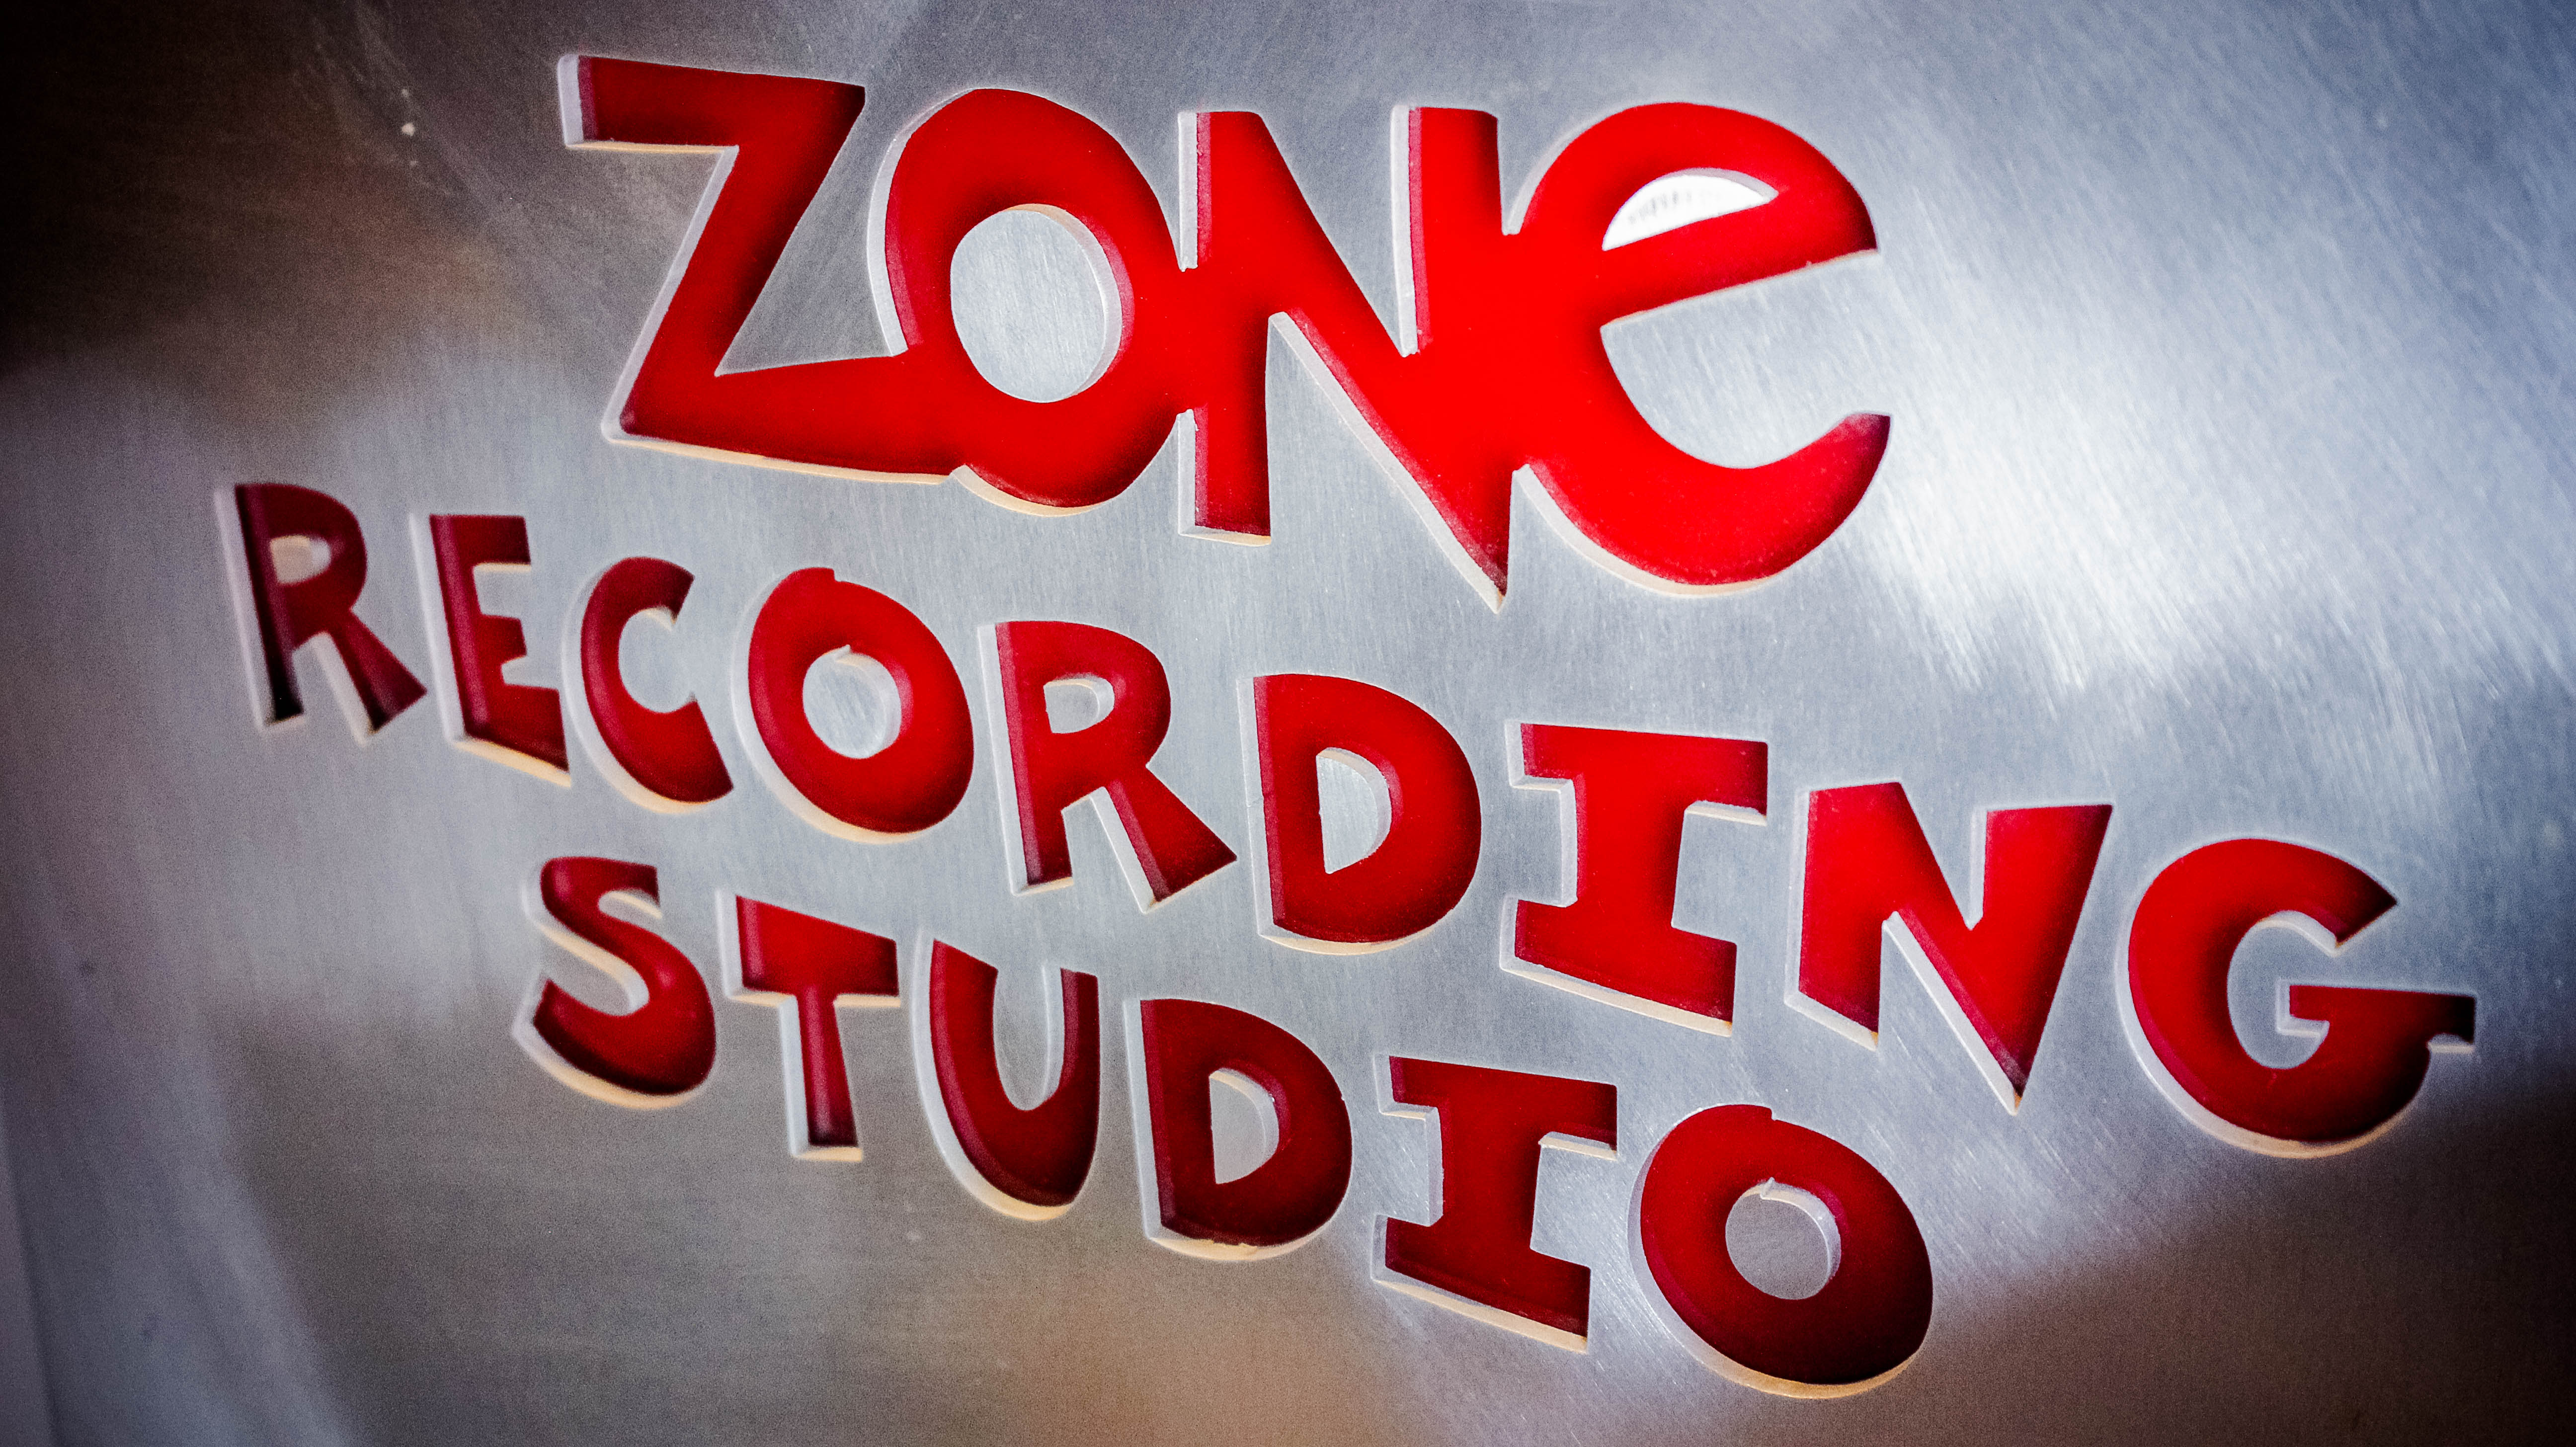 Zone Recording Studio is giving voice to the North Bay